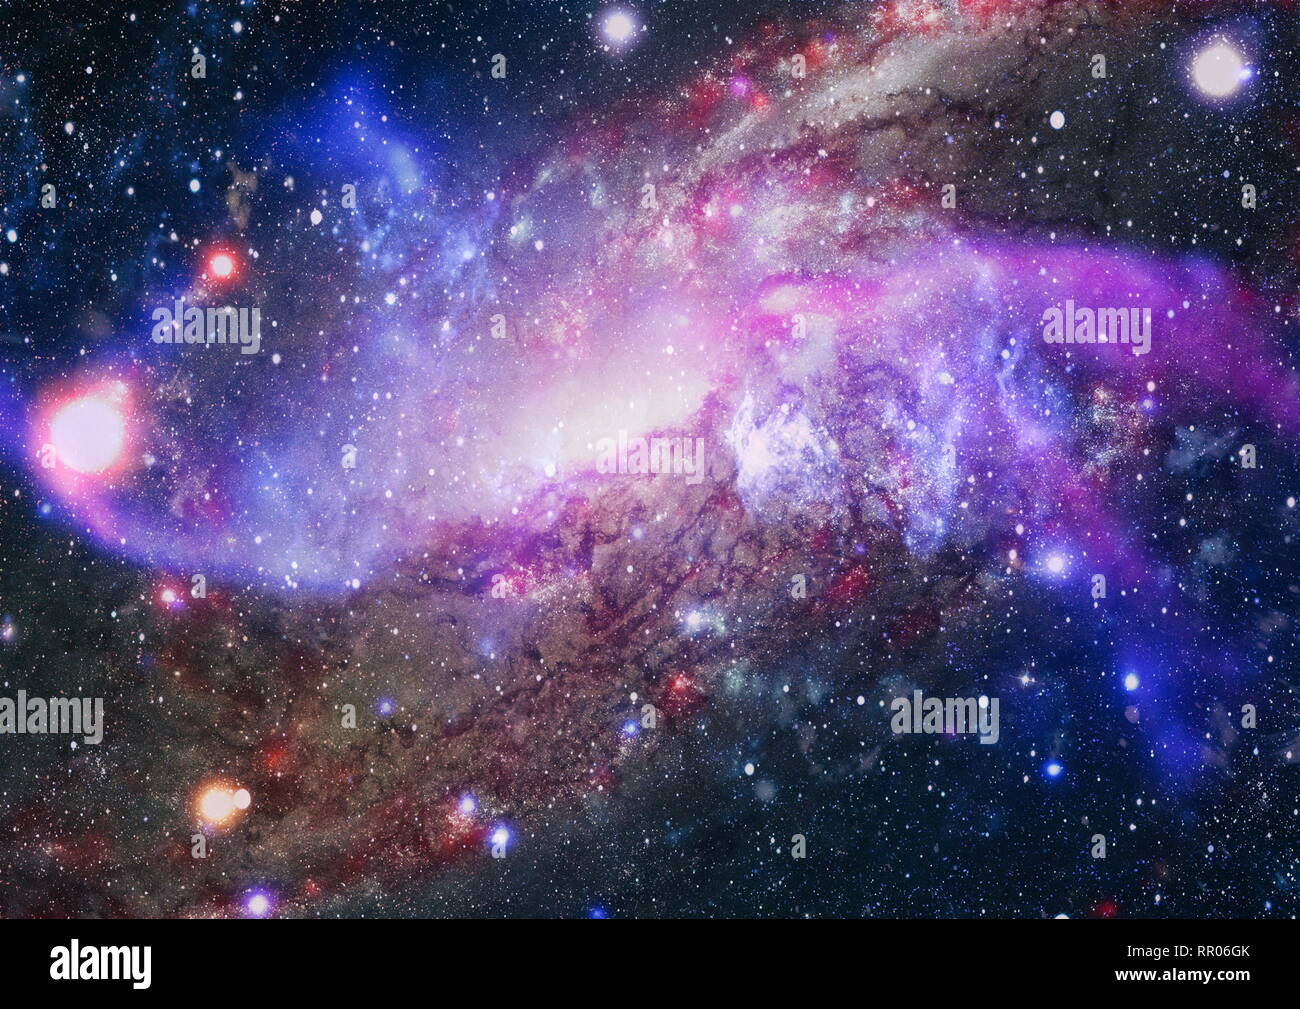 planets, stars and galaxies in outer space showing the beauty of space exploration. Elements furnished by NASA Stock Photo